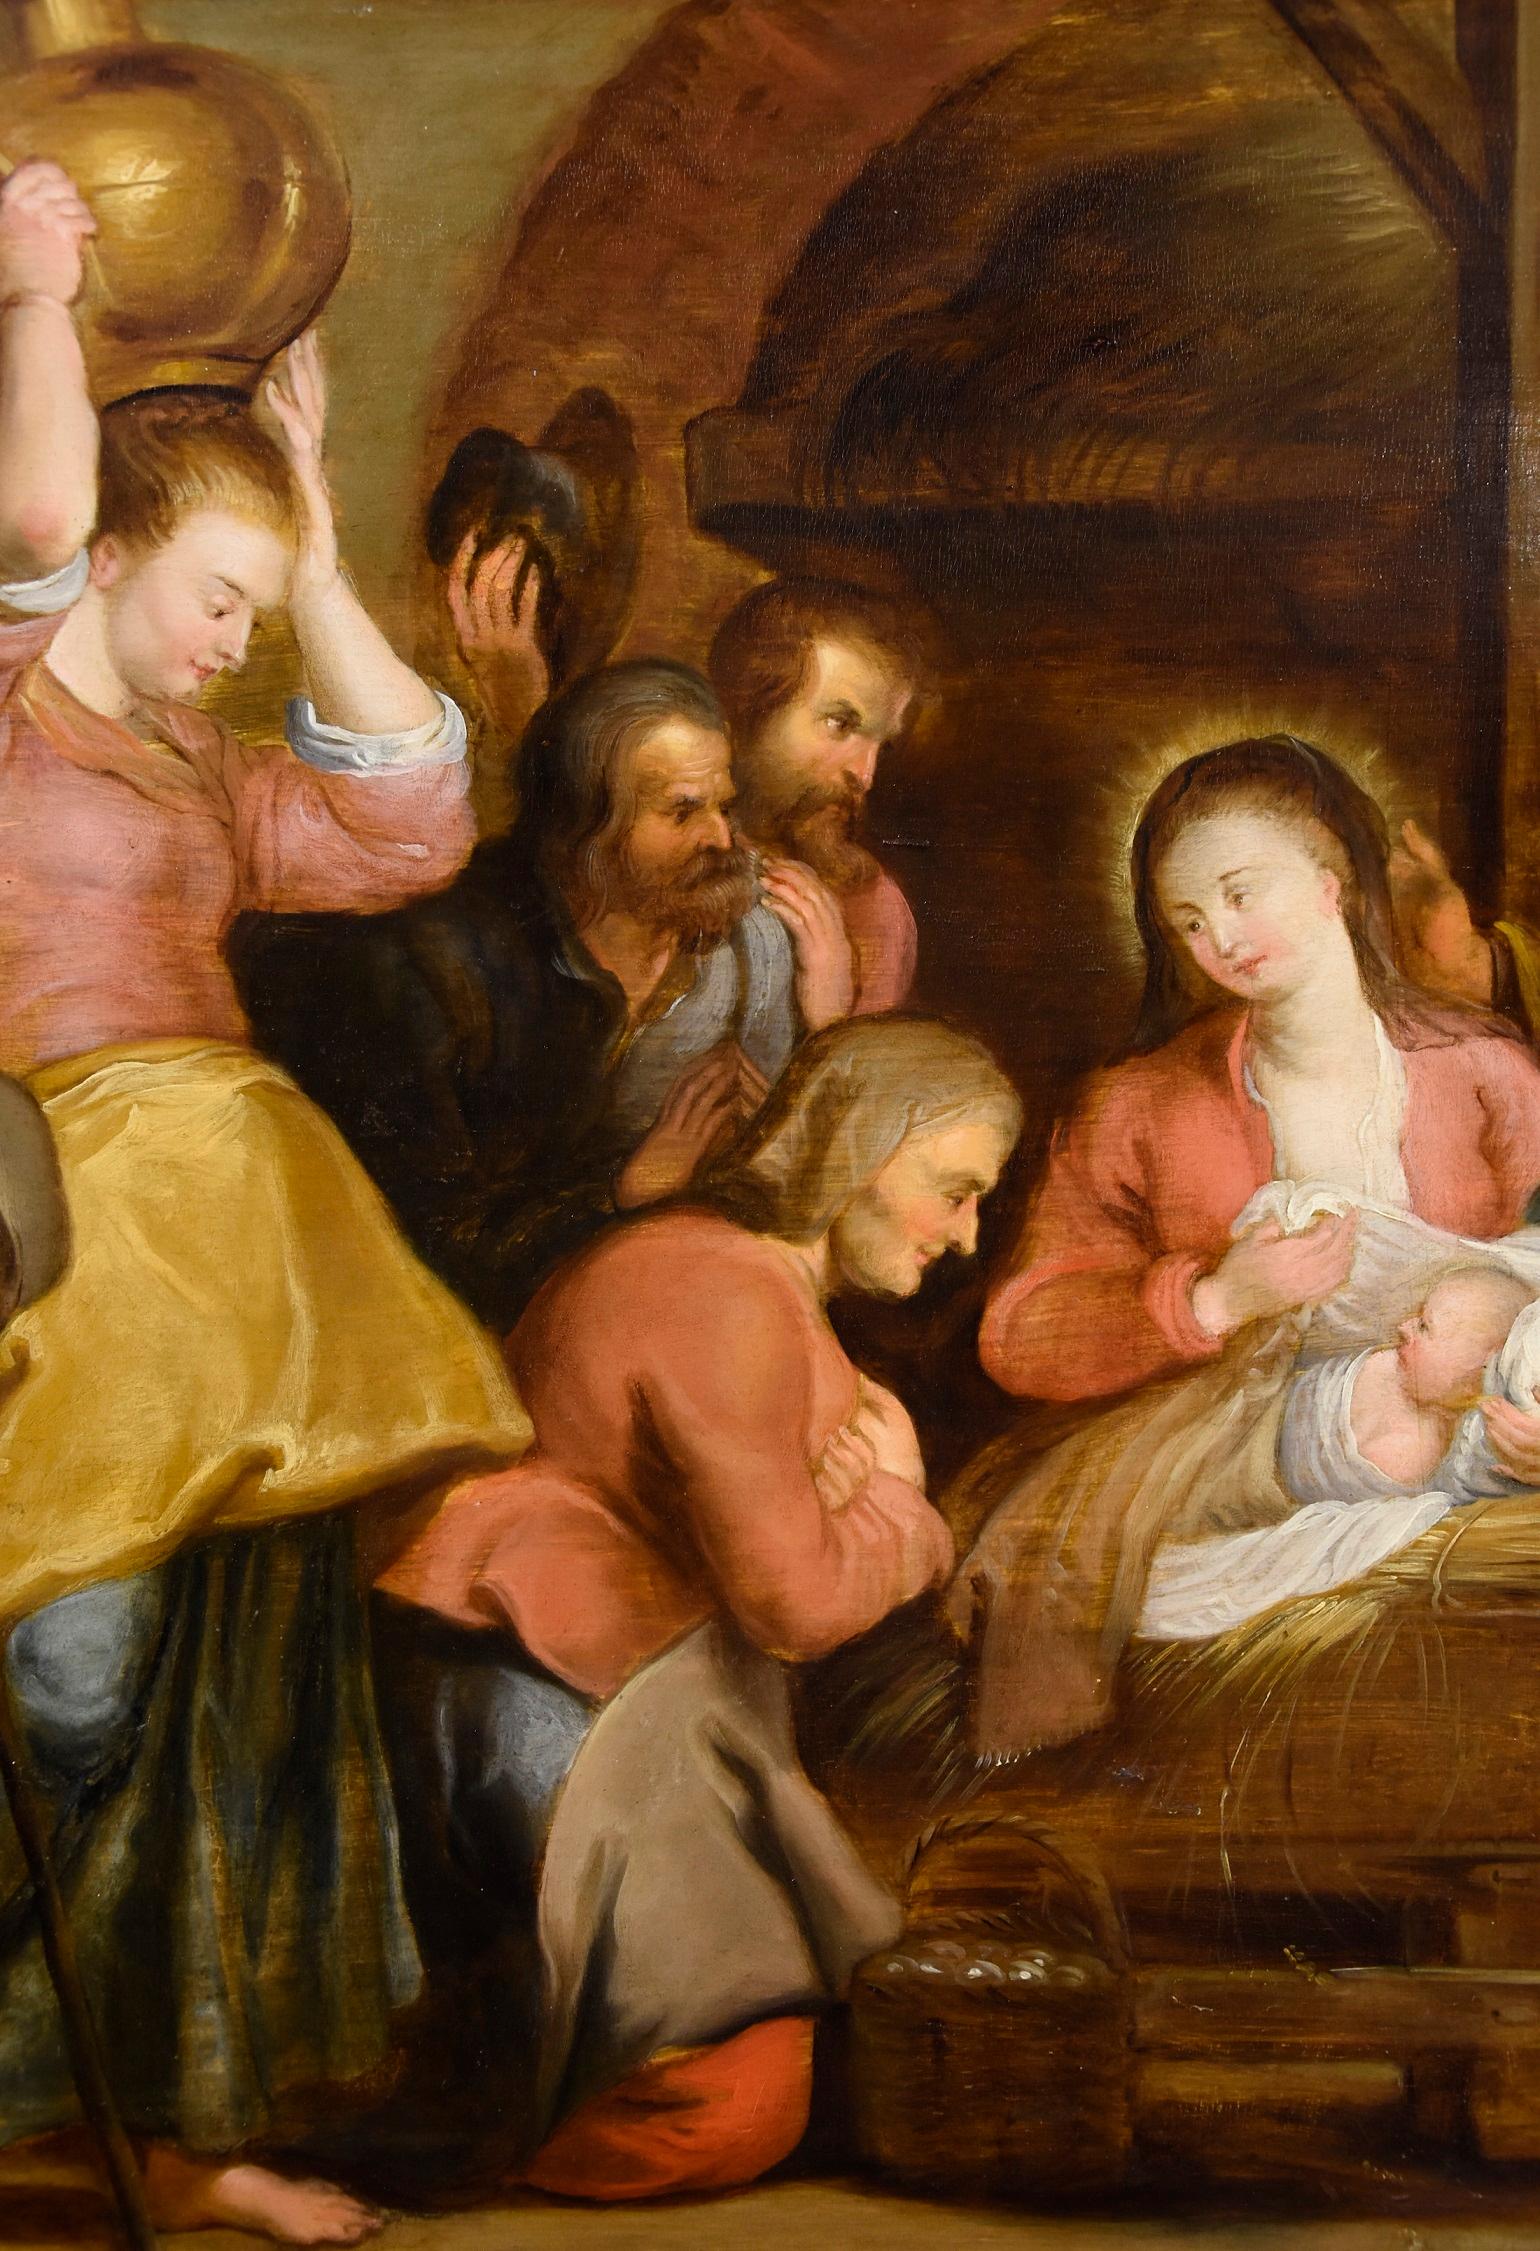 Oil painting on wood of high quality value, work attributable to the workshop of Peter Paul Rubens (Siegen 1577- Antwerp 1640)

Nativity with Adoration of the Shepherds - Flemish painter of the first half of the 17th century
Workshop of Peter Paul